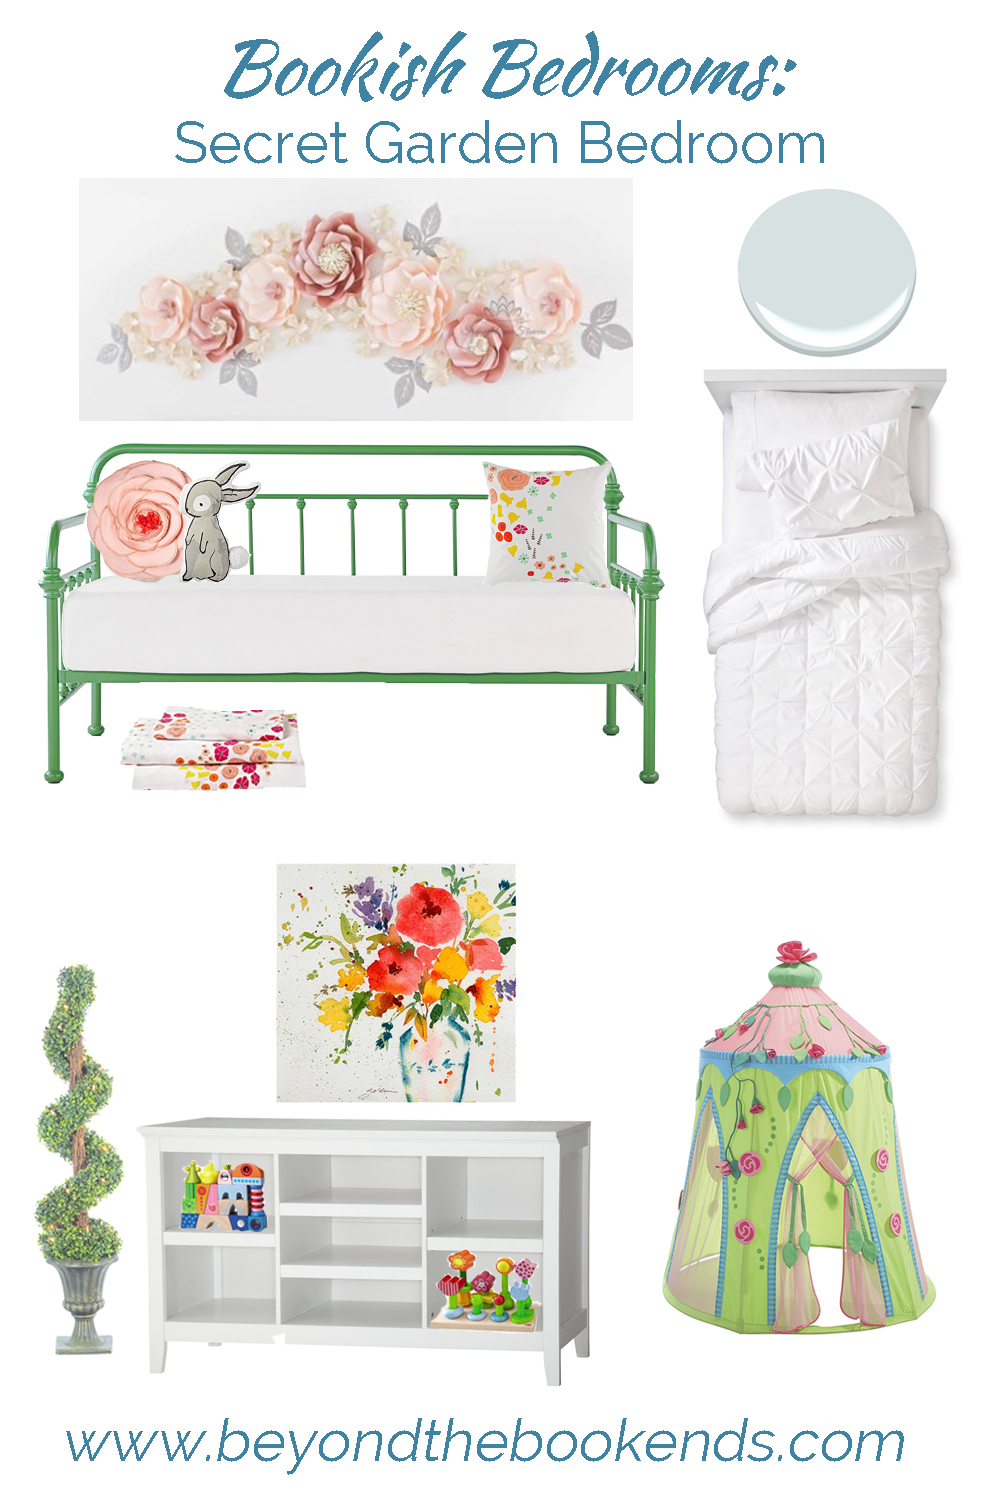 This secret garden bedroom is perfect for an little girls! The giant flowers and bench-like bed are perfect for a secret garden nursery.